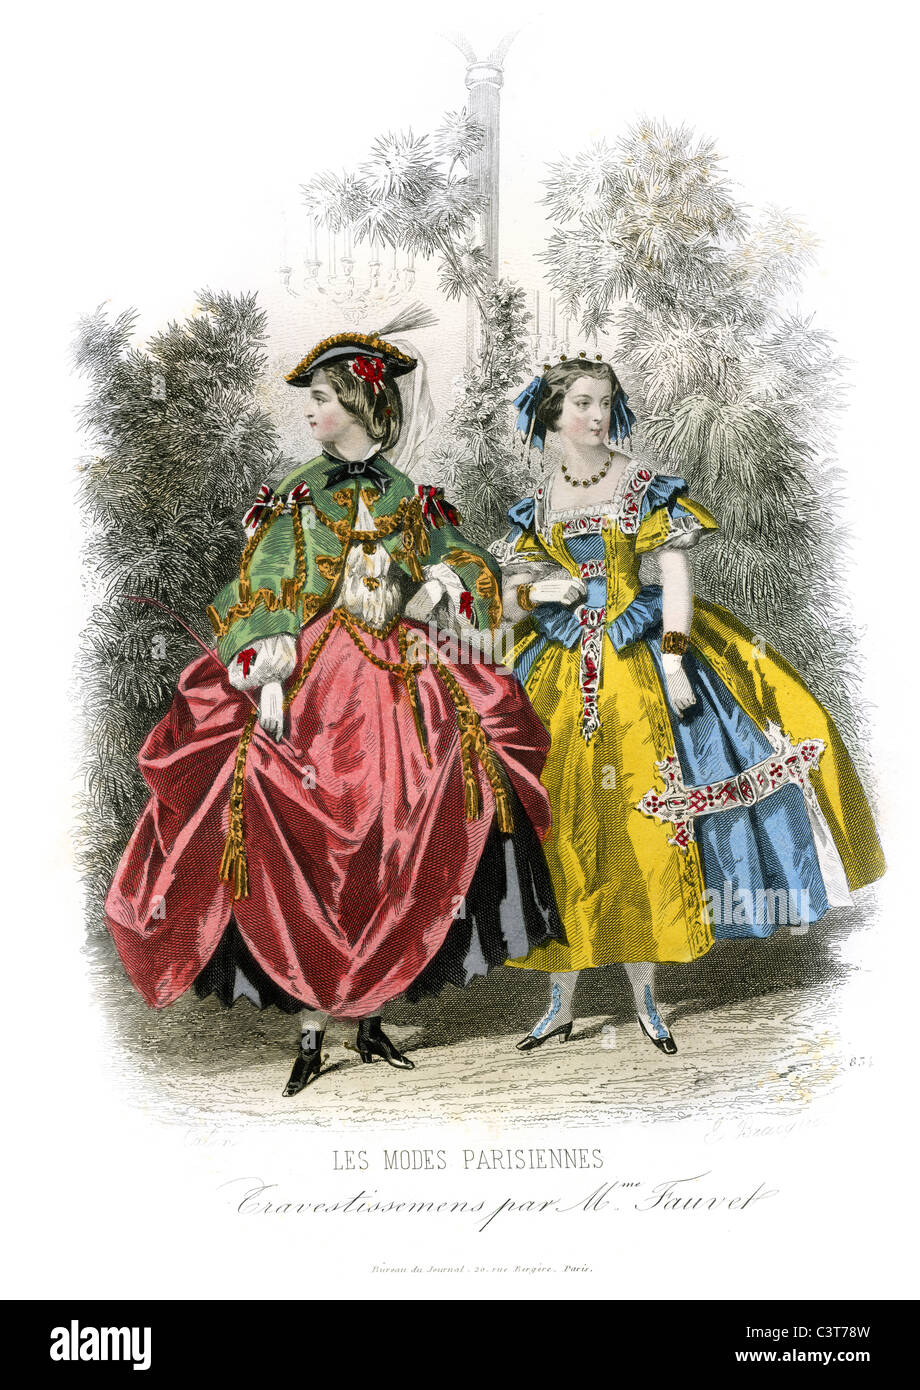 Two young women wearing fashionable outfits from Paris, France around 1860 Stock Photo